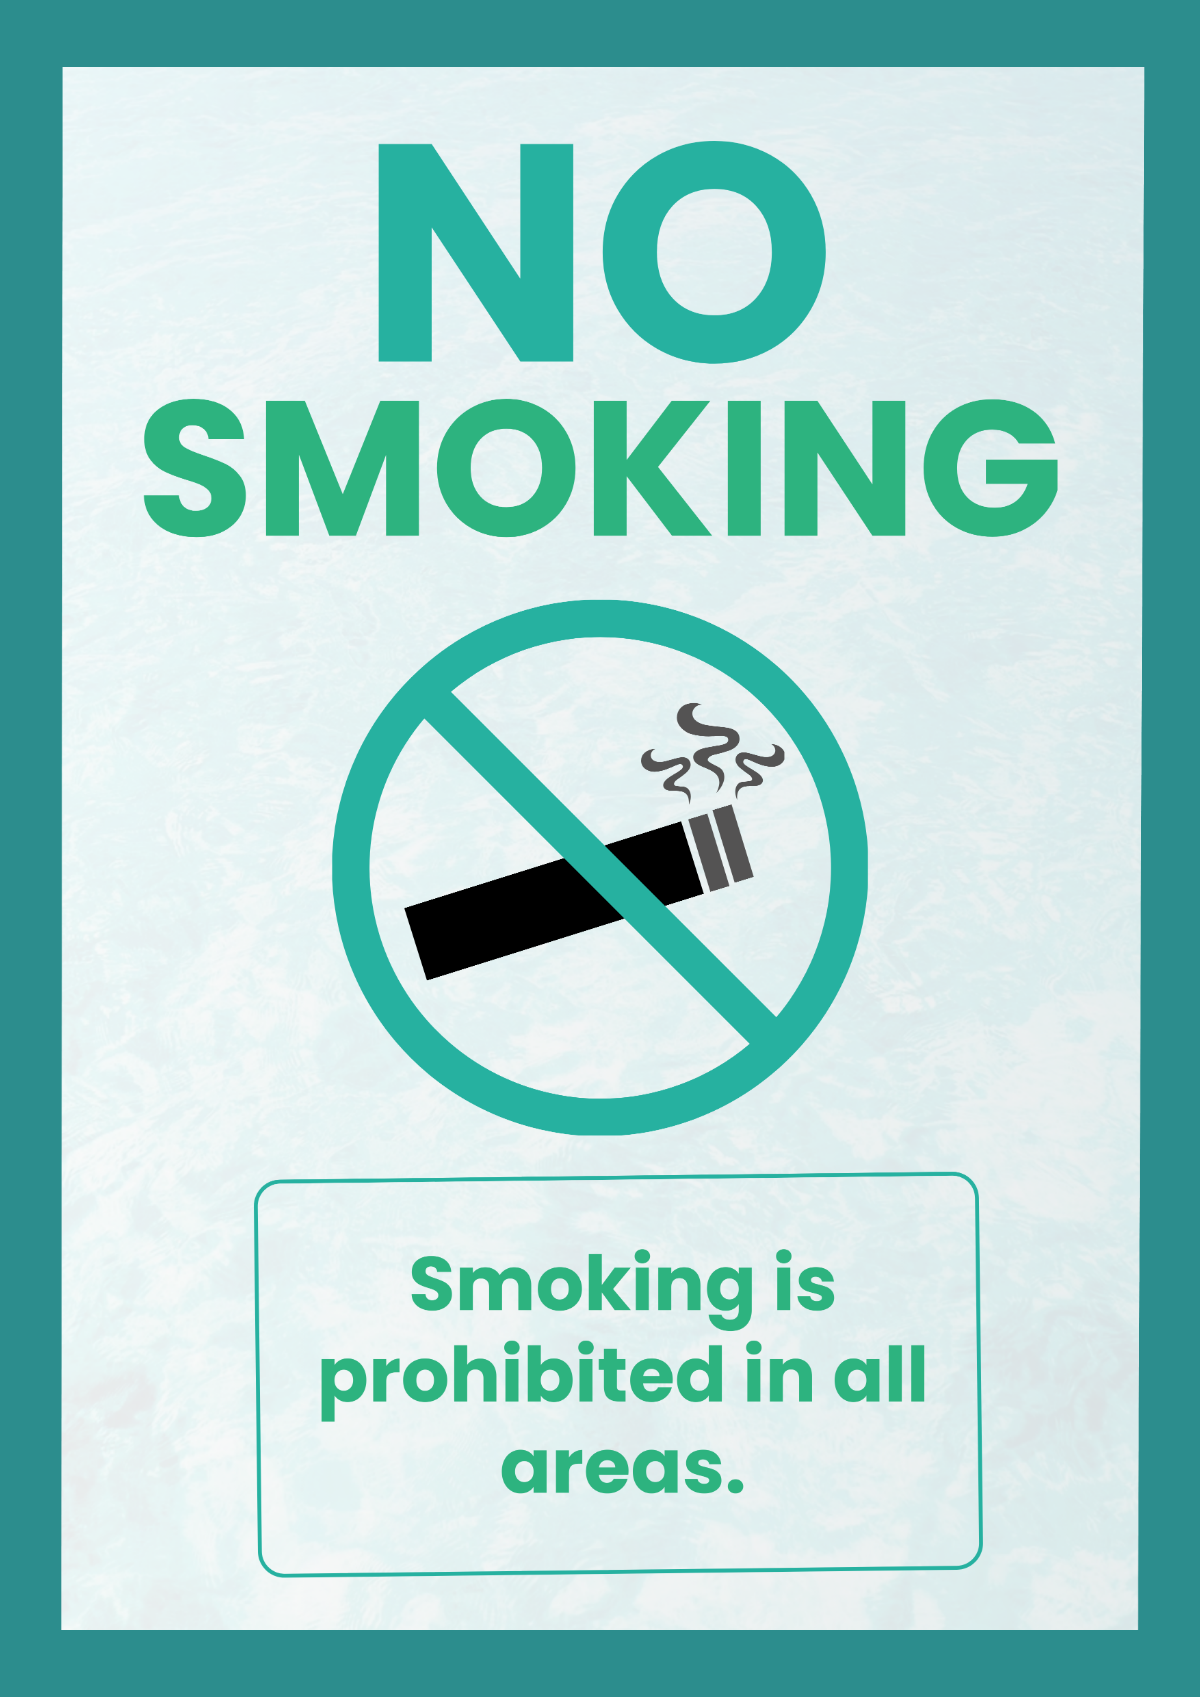 Cleaning Services No Smoking Sign Template